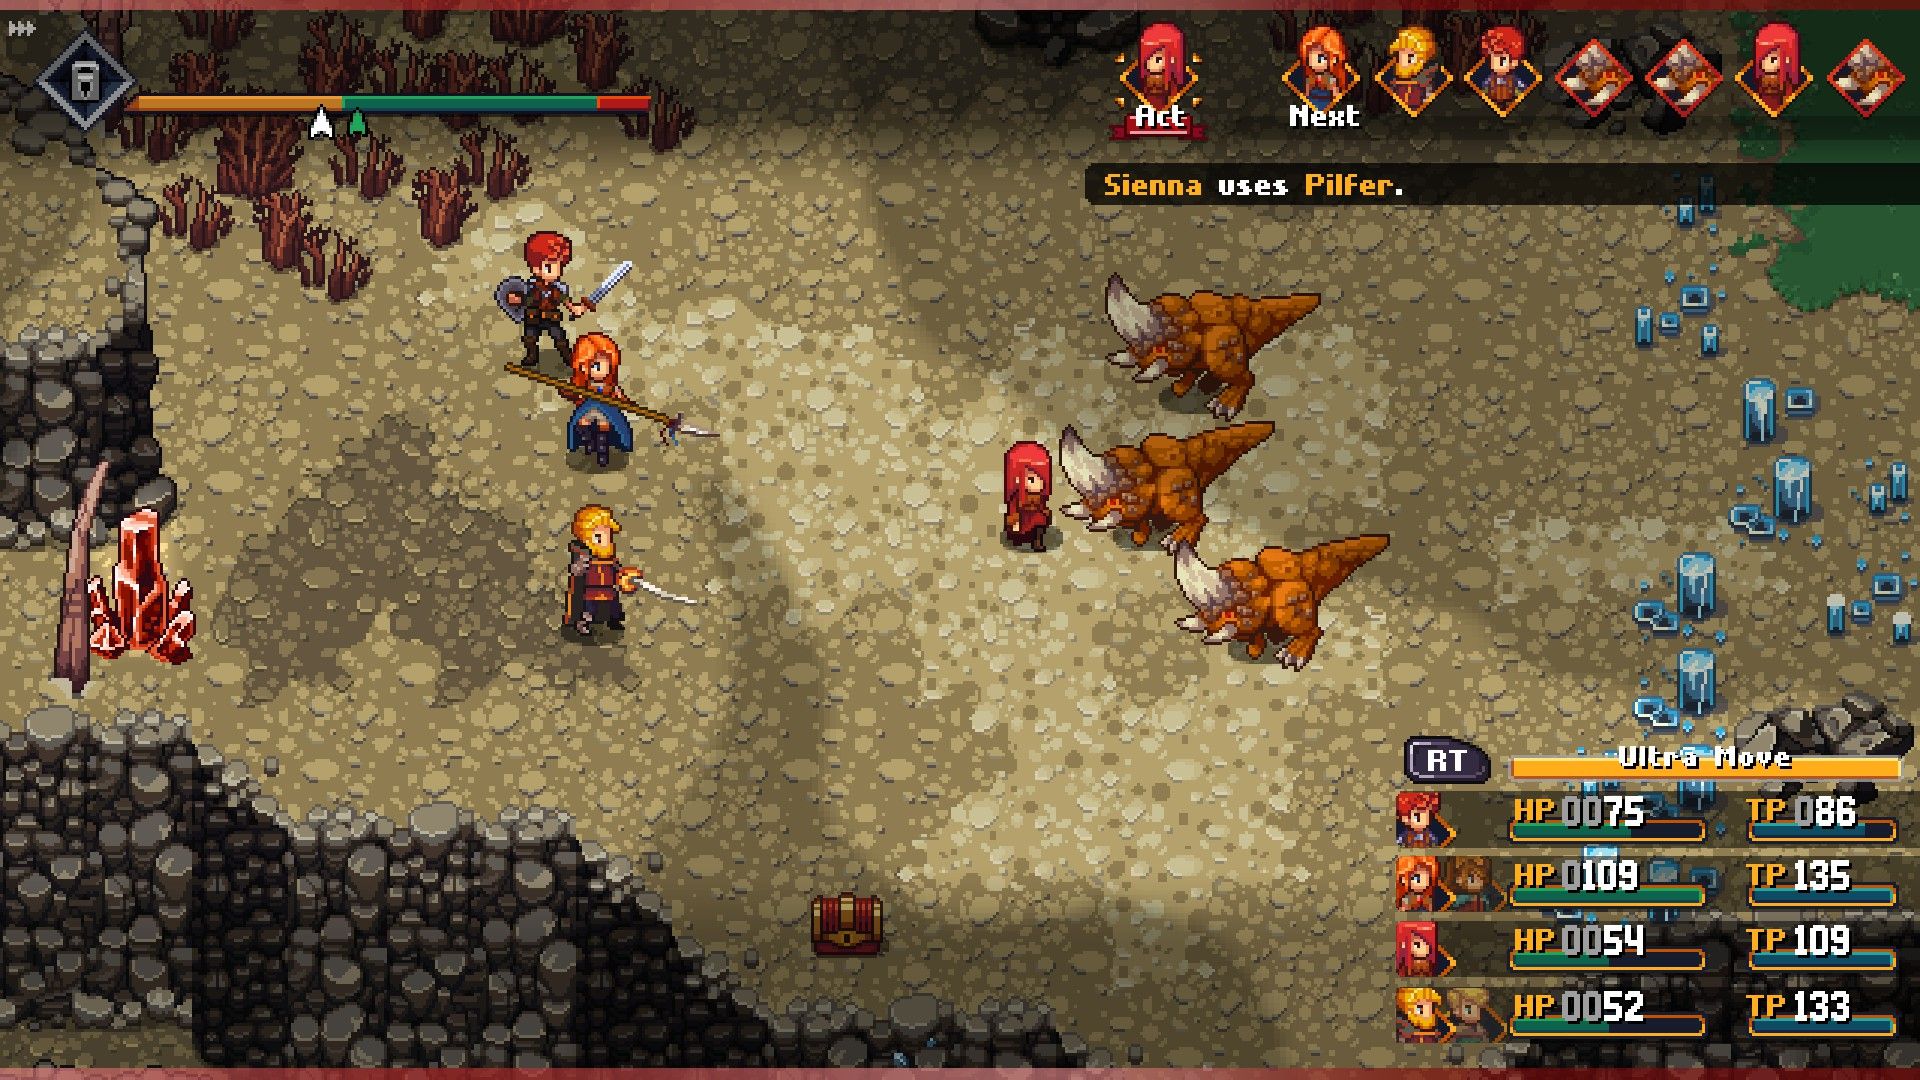 The heroes in Chained Echoes battle against 3 lizard-like monsters with giant horns in the mountains.